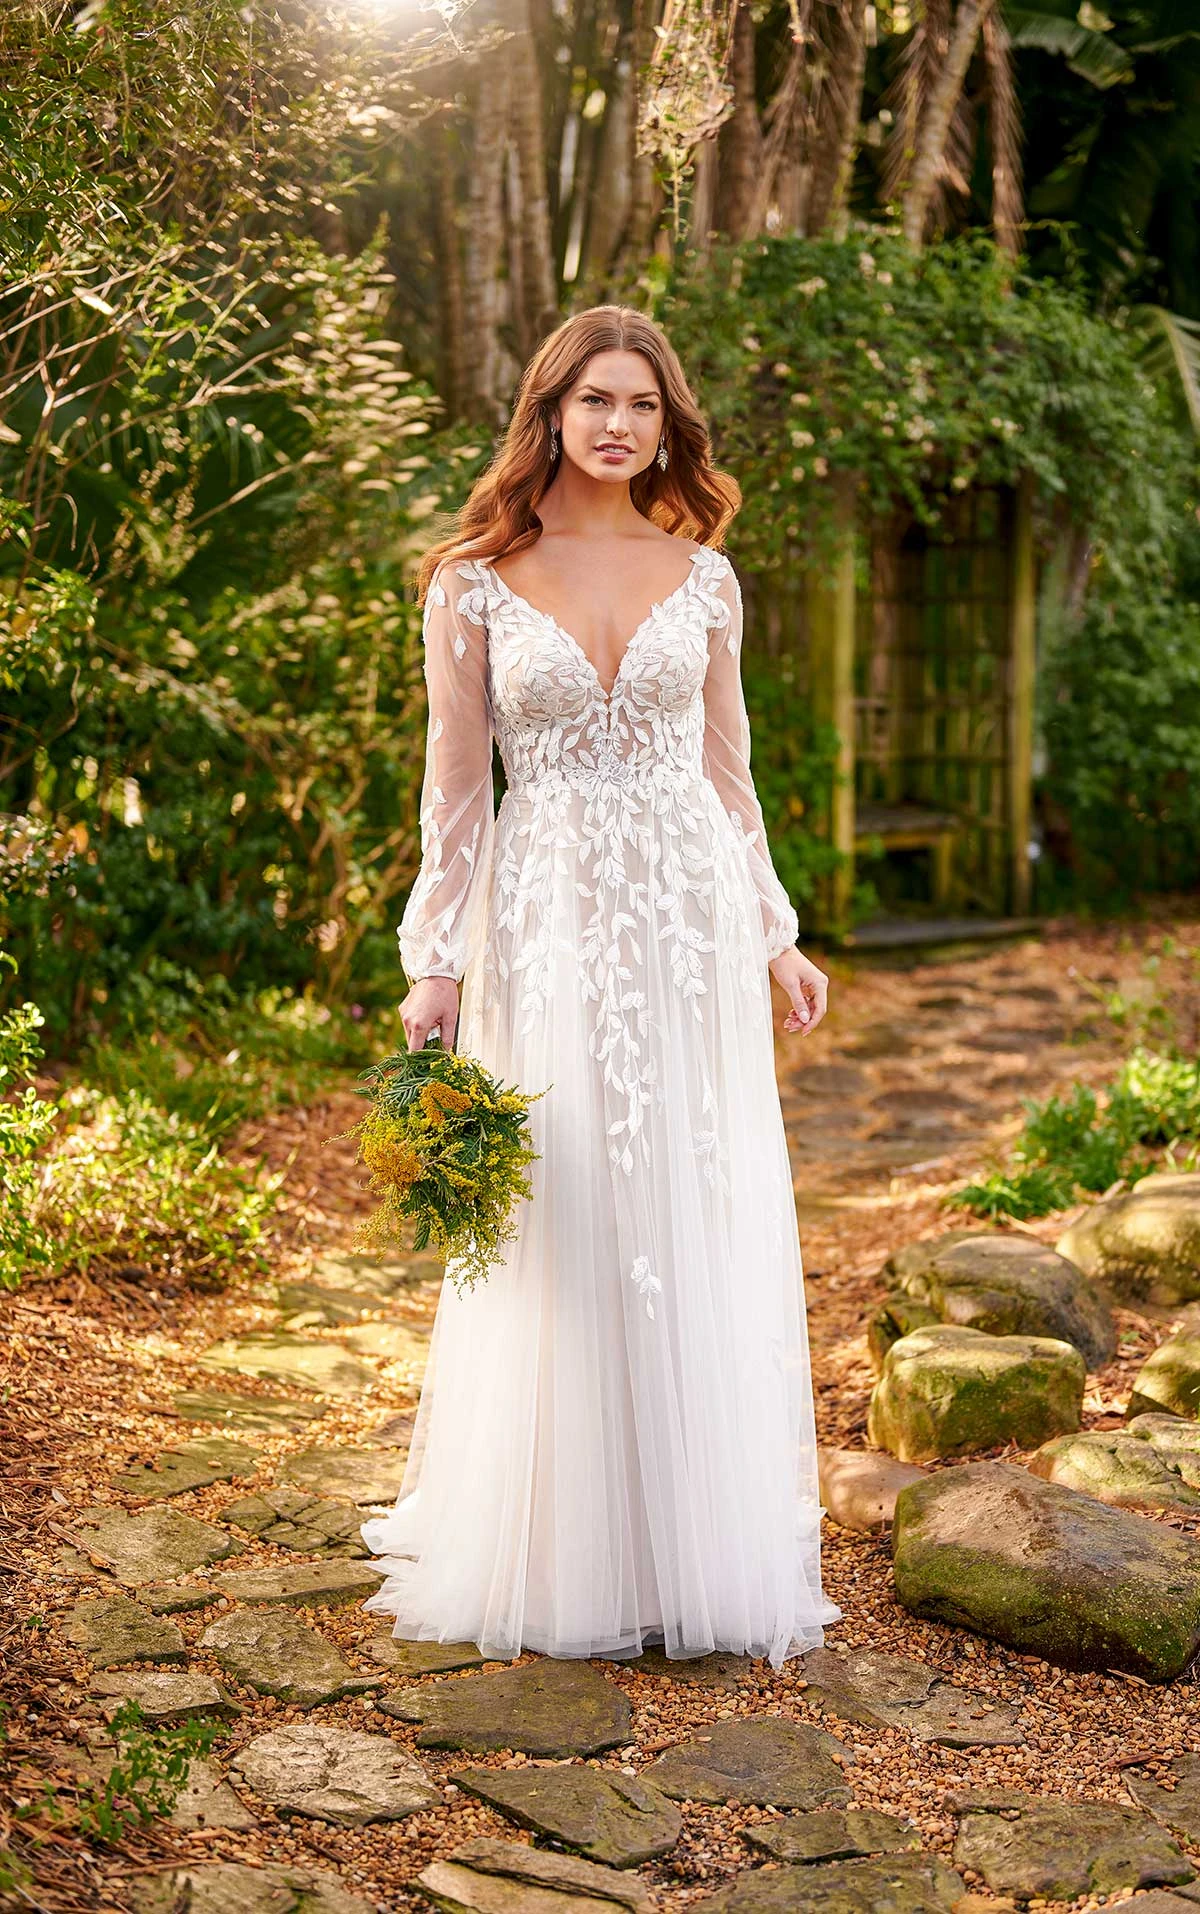 Sheer Boho-Style Wedding Dress with Bell Sleeves